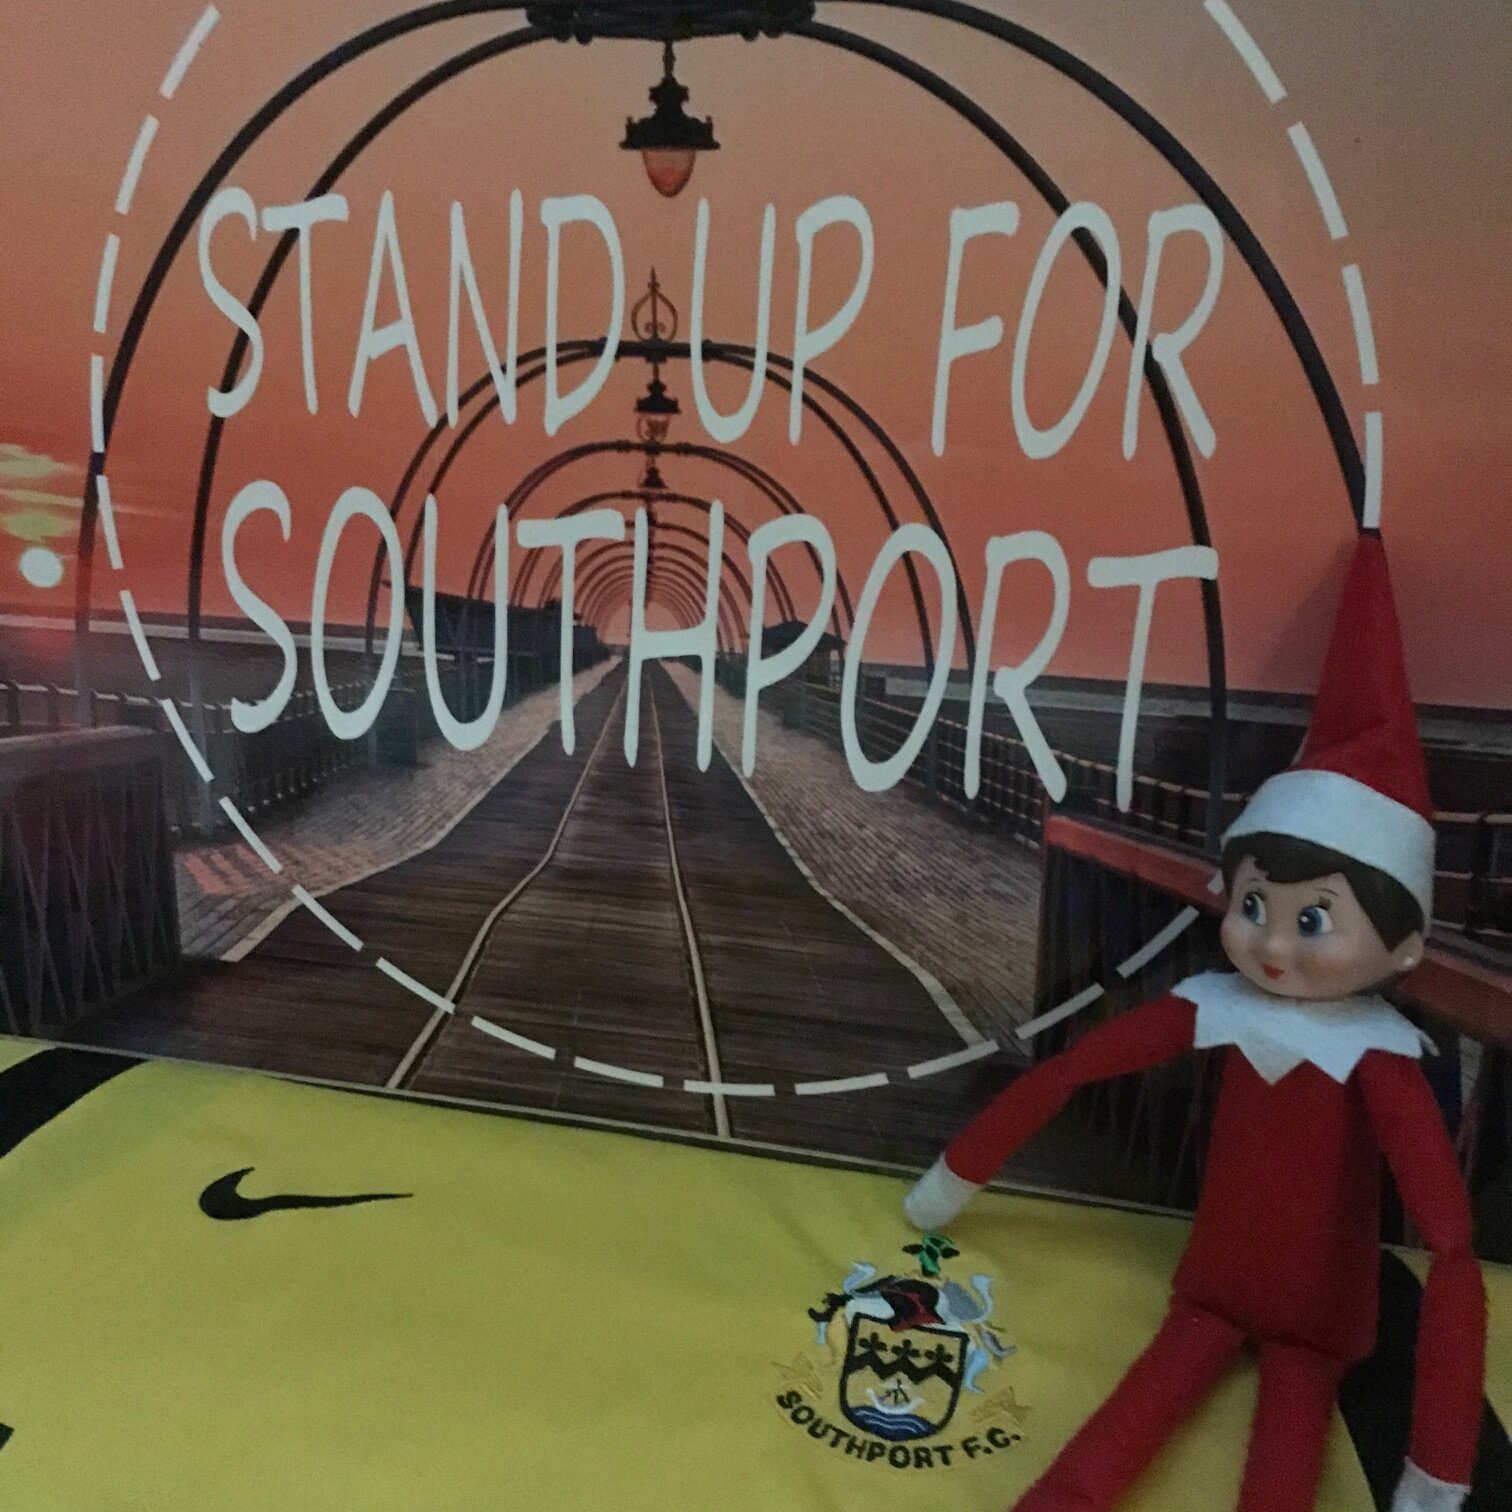 Elf On The Shelf loves Stand Up For Southrport. When not busy helping Santa or making sure children are good, Elf loves to enjoy rides at Southport Pleasureland, paddle board on the Marine Lake, watch Southport FC or go shopping on Lord Street in Southport